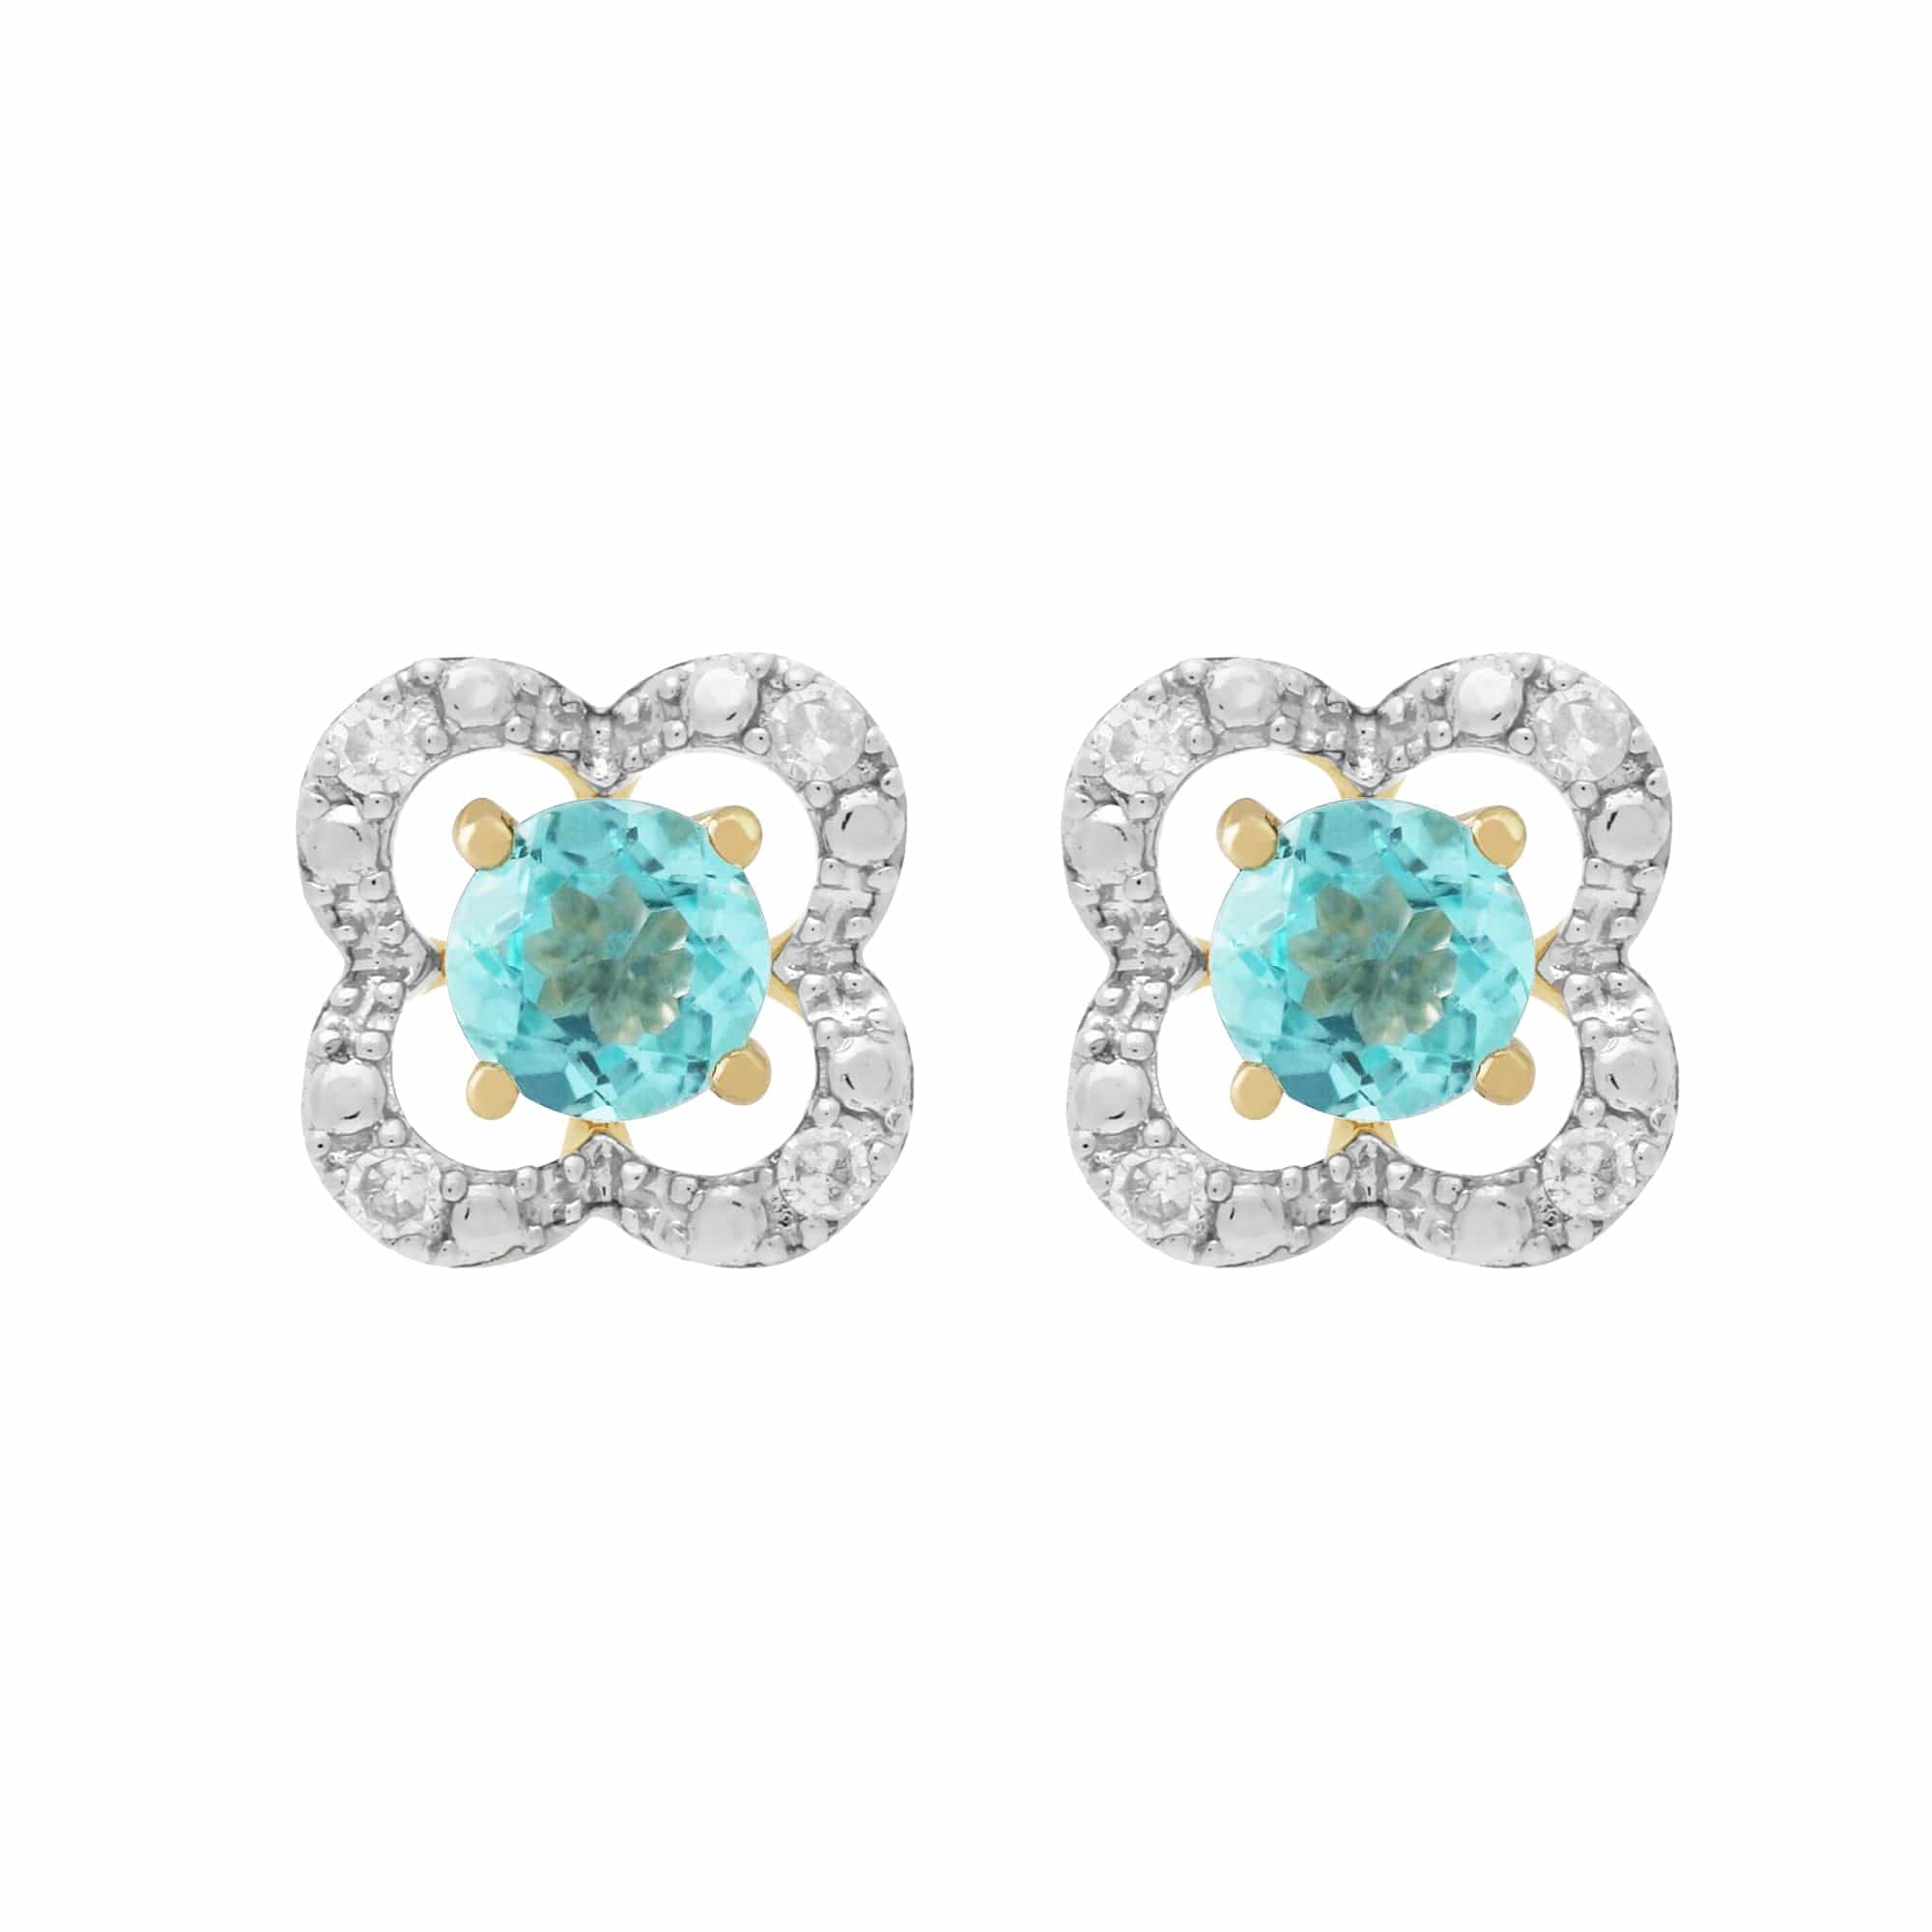 183E0083439-191E0375019 Classic Round Apatite Studs with Detachable Diamond Floral Ear Jacket in 9ct Yellow Gold 1